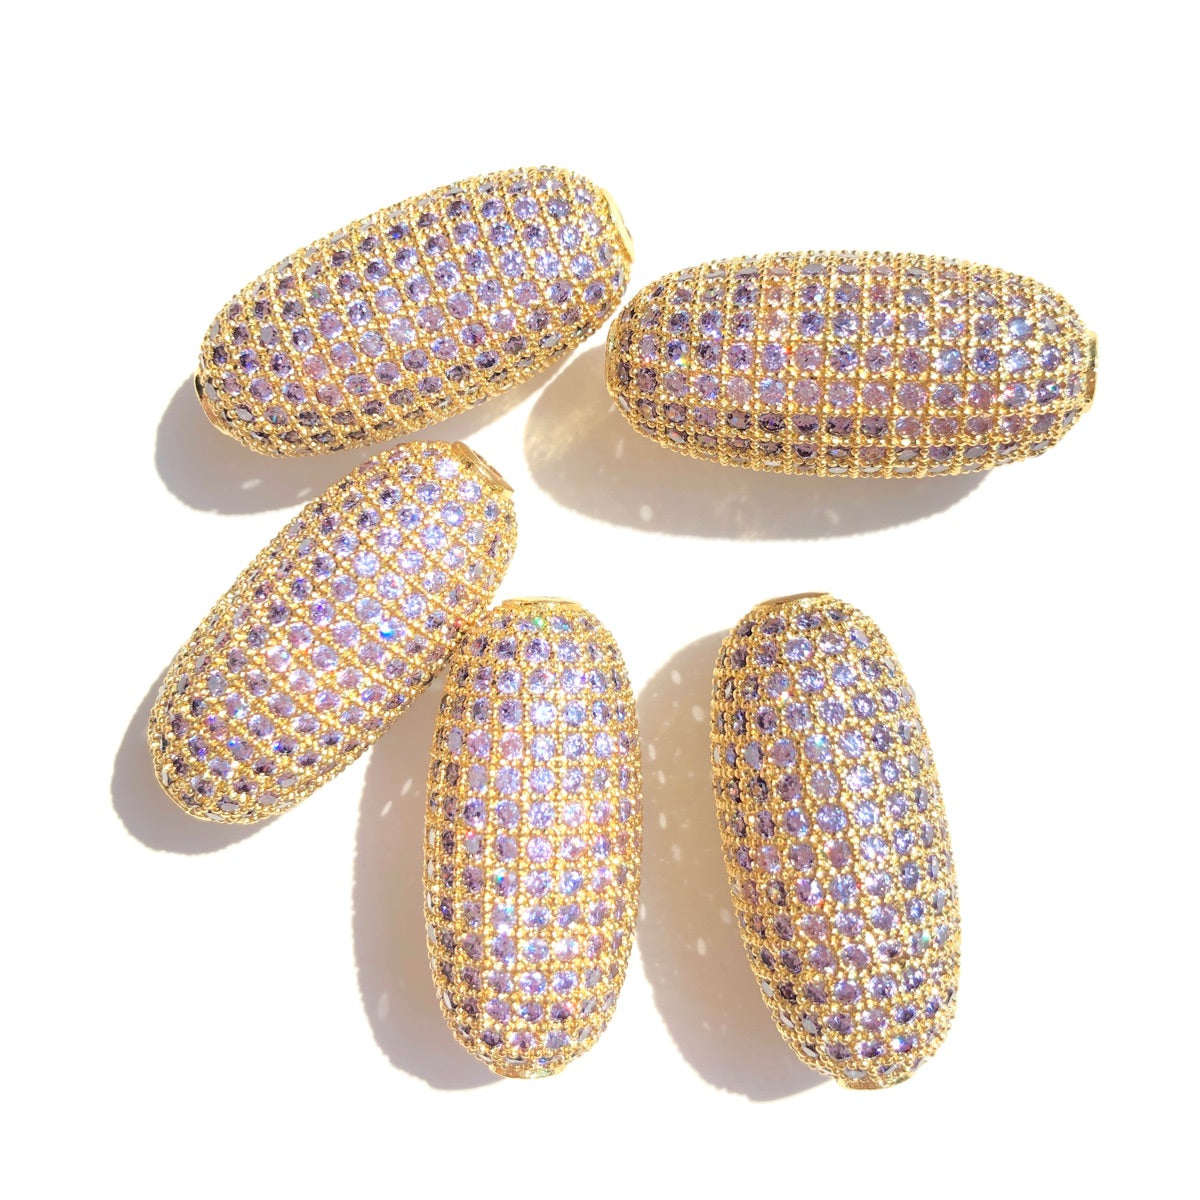 5-10pcs/lot Green Blue Turquoise Purple Reddish Orange Multicolor CZ Paved Oval Beads Centerpiece Spacers Purple on Gold CZ Paved Spacers Colorful Zirconia New Spacers Arrivals Oval Spacers Charms Beads Beyond